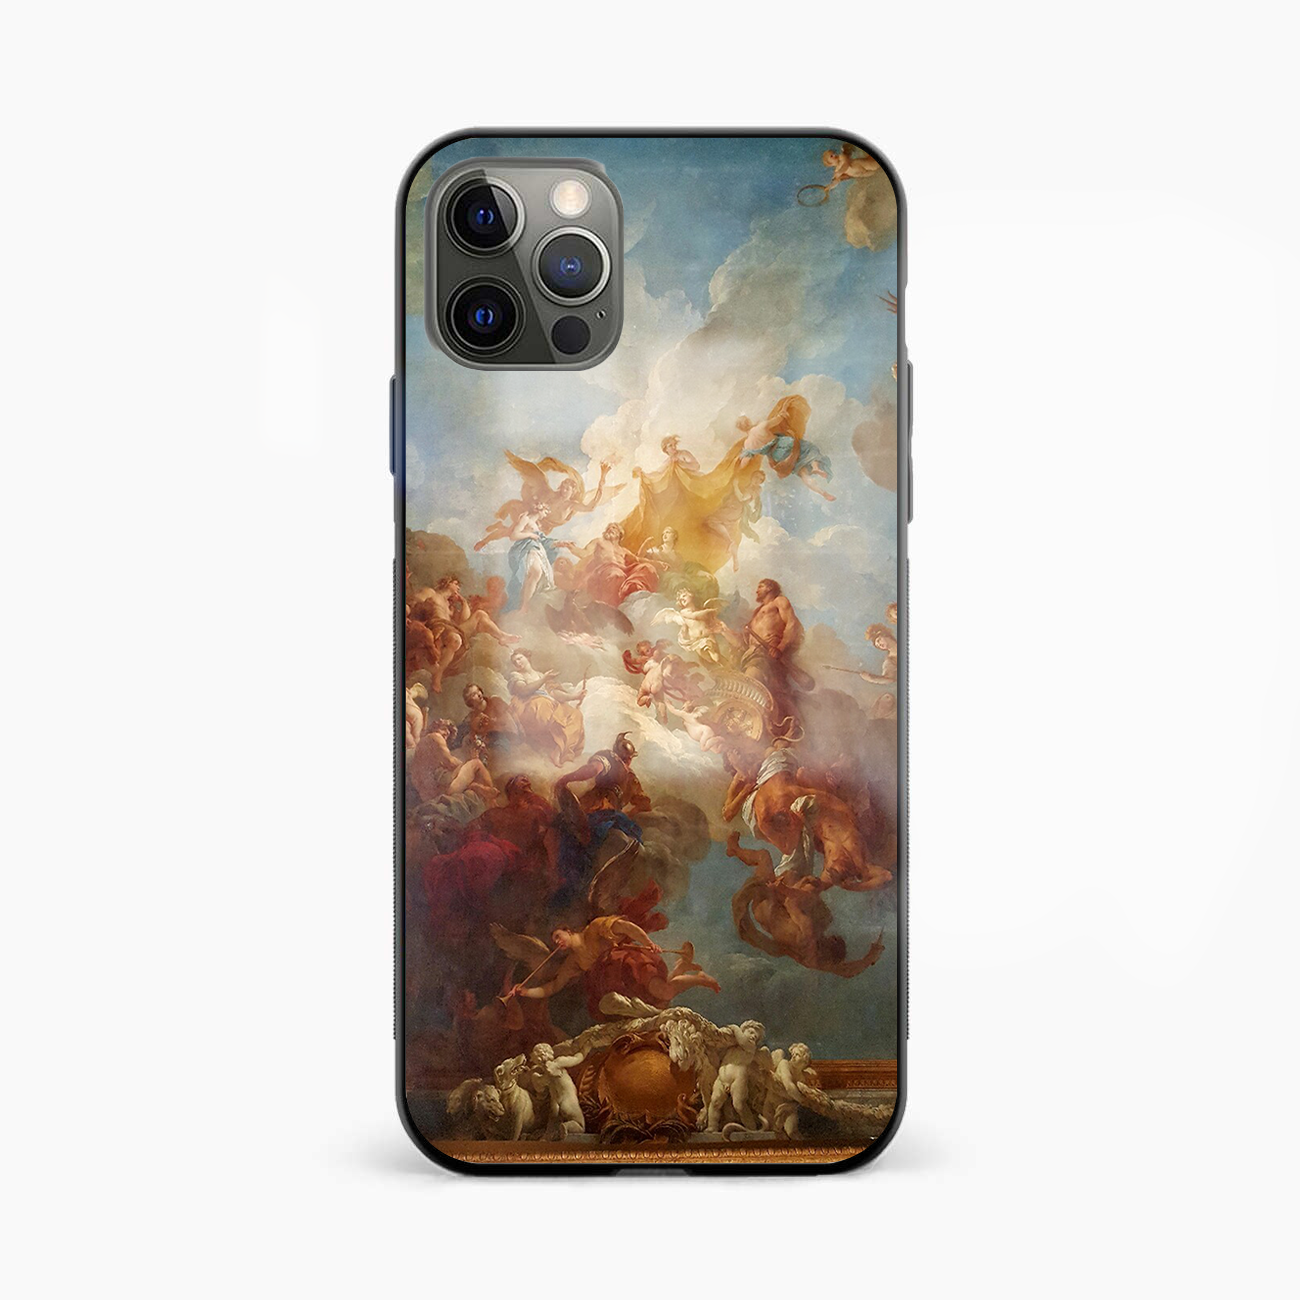 Renaissance Art Abstract Glass Phone Case Cover - Aesthetic Phone Covers - Culltique